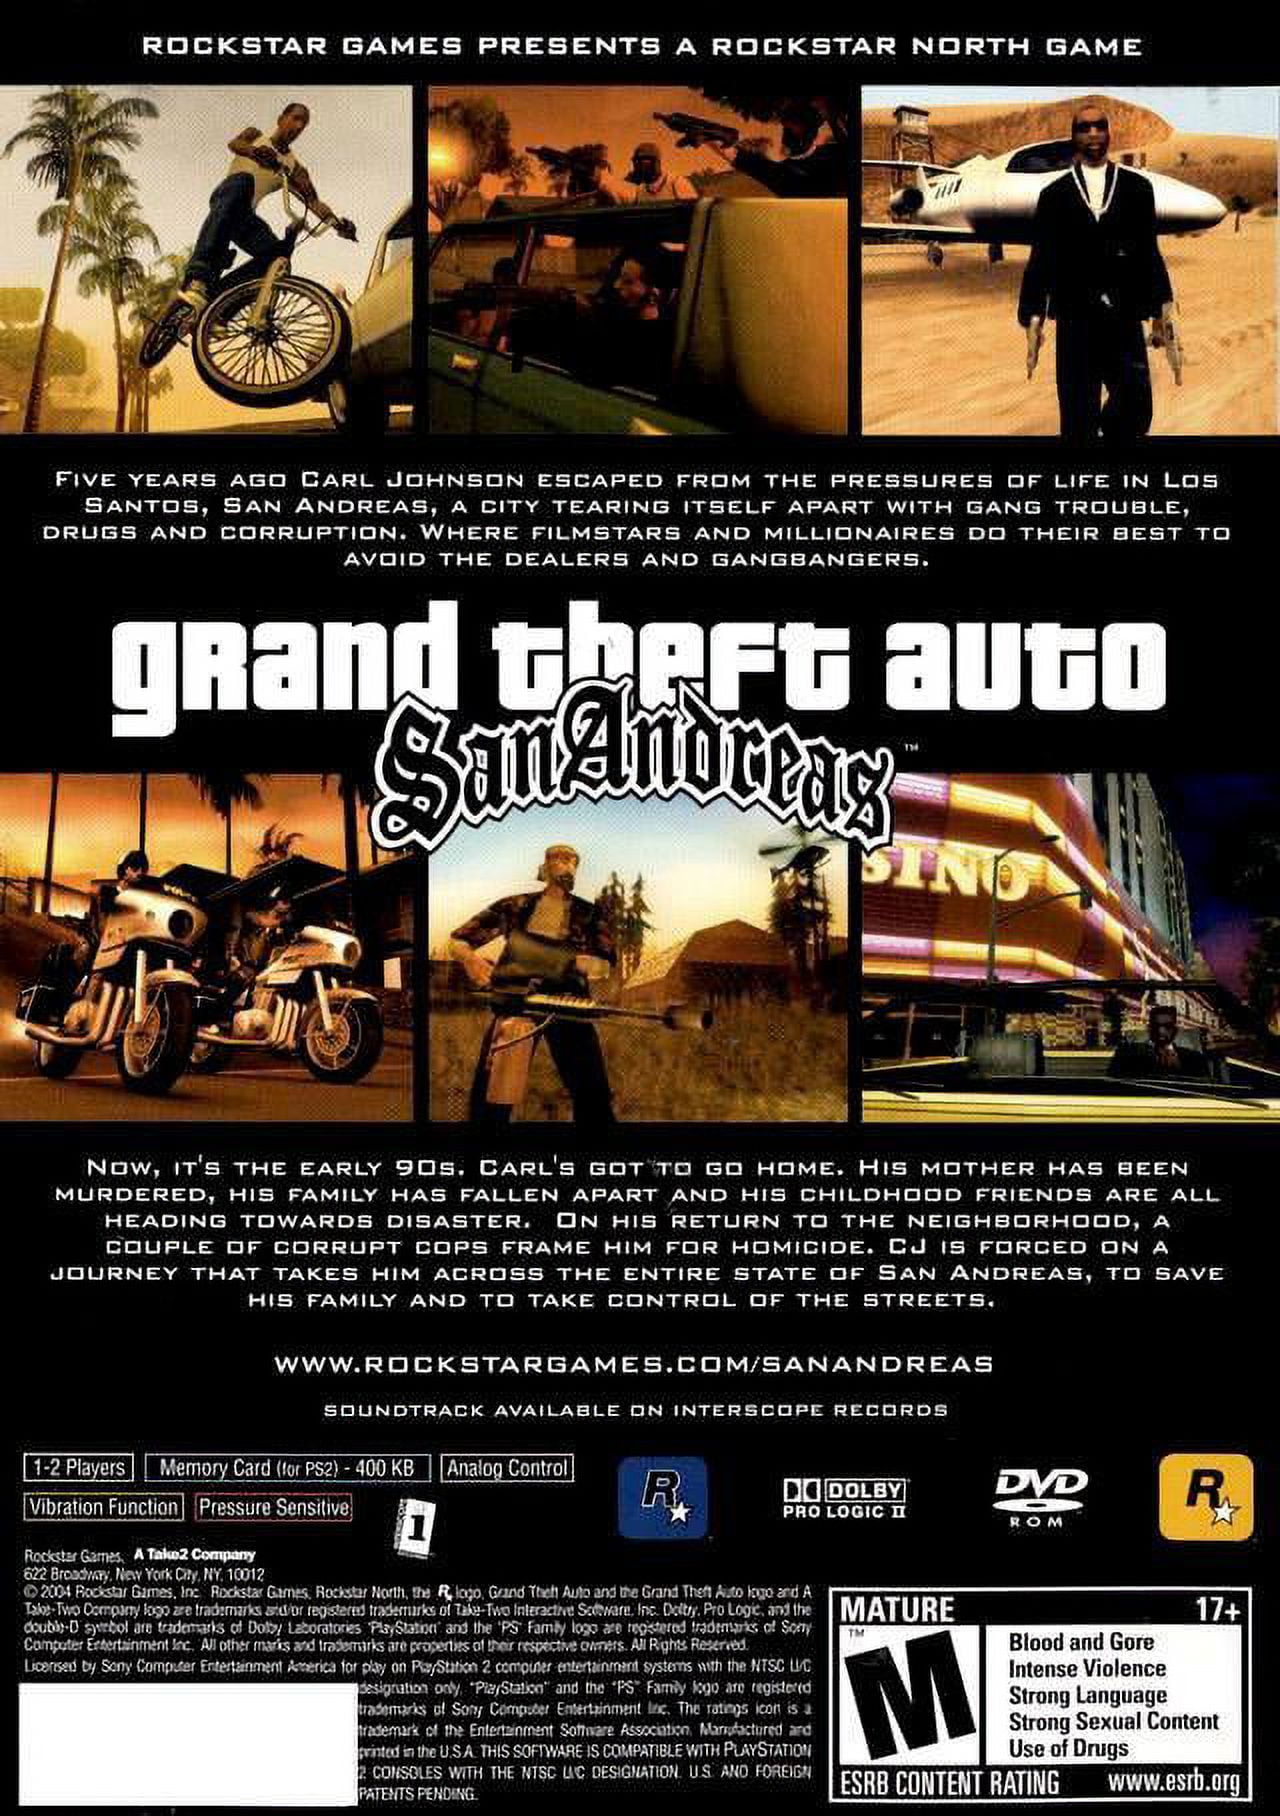 26 October, 2004 year Grand Theft Auto: San Andreas was out. hard to  believe that game is already 17 years old : r/sanandreas